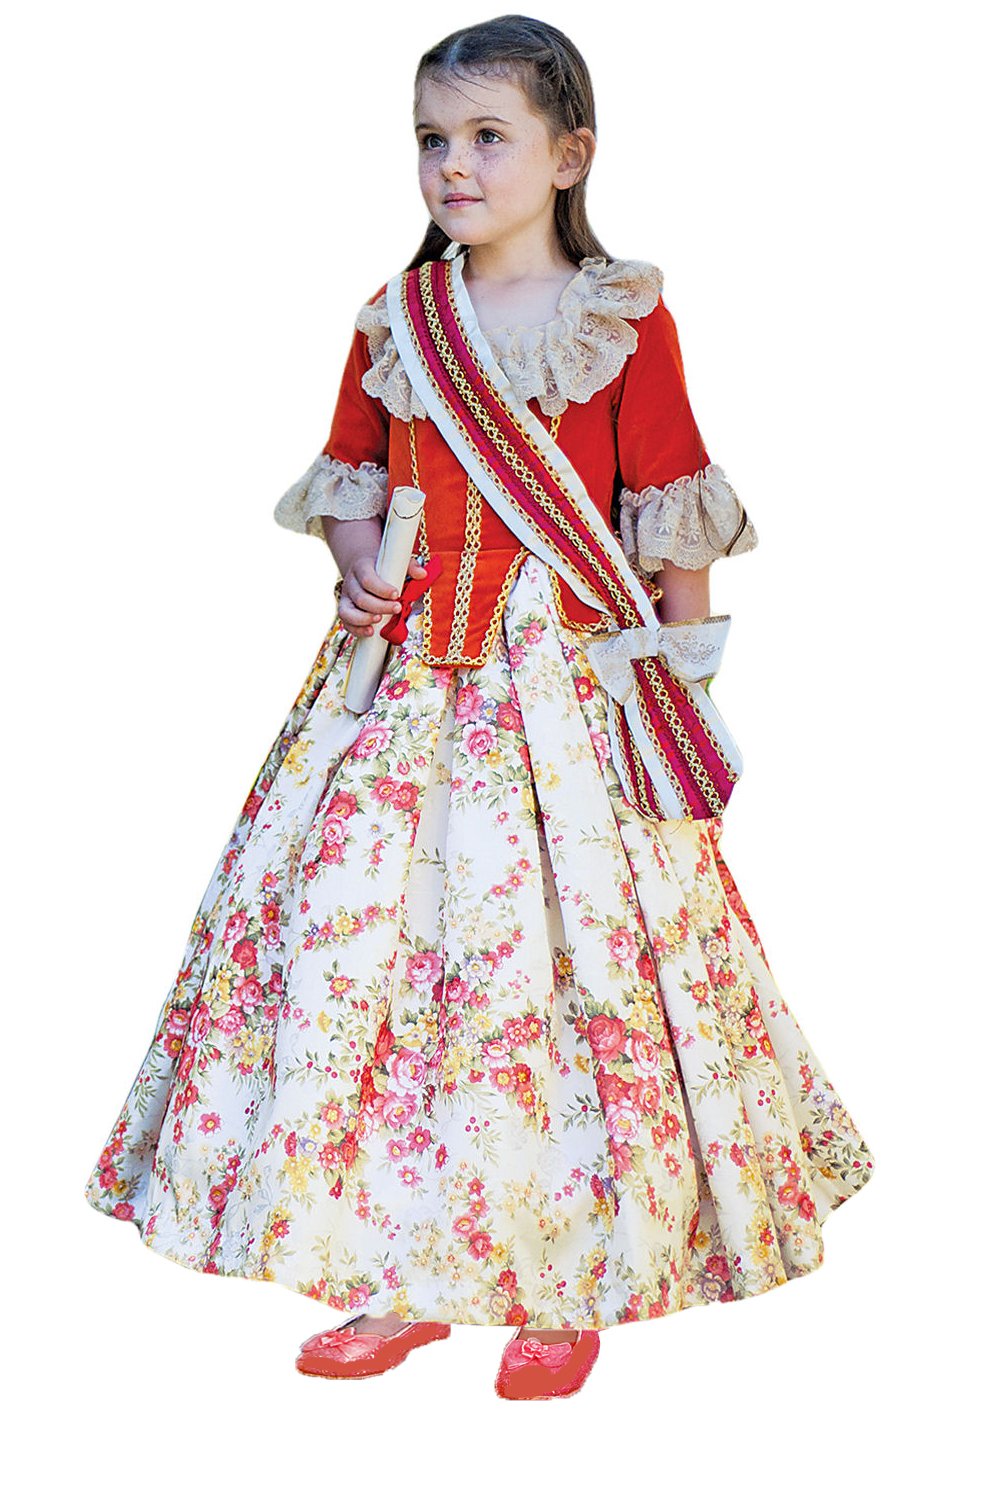 Floral Countess Girls Fency Dress 134-148cm (9-11 Years)